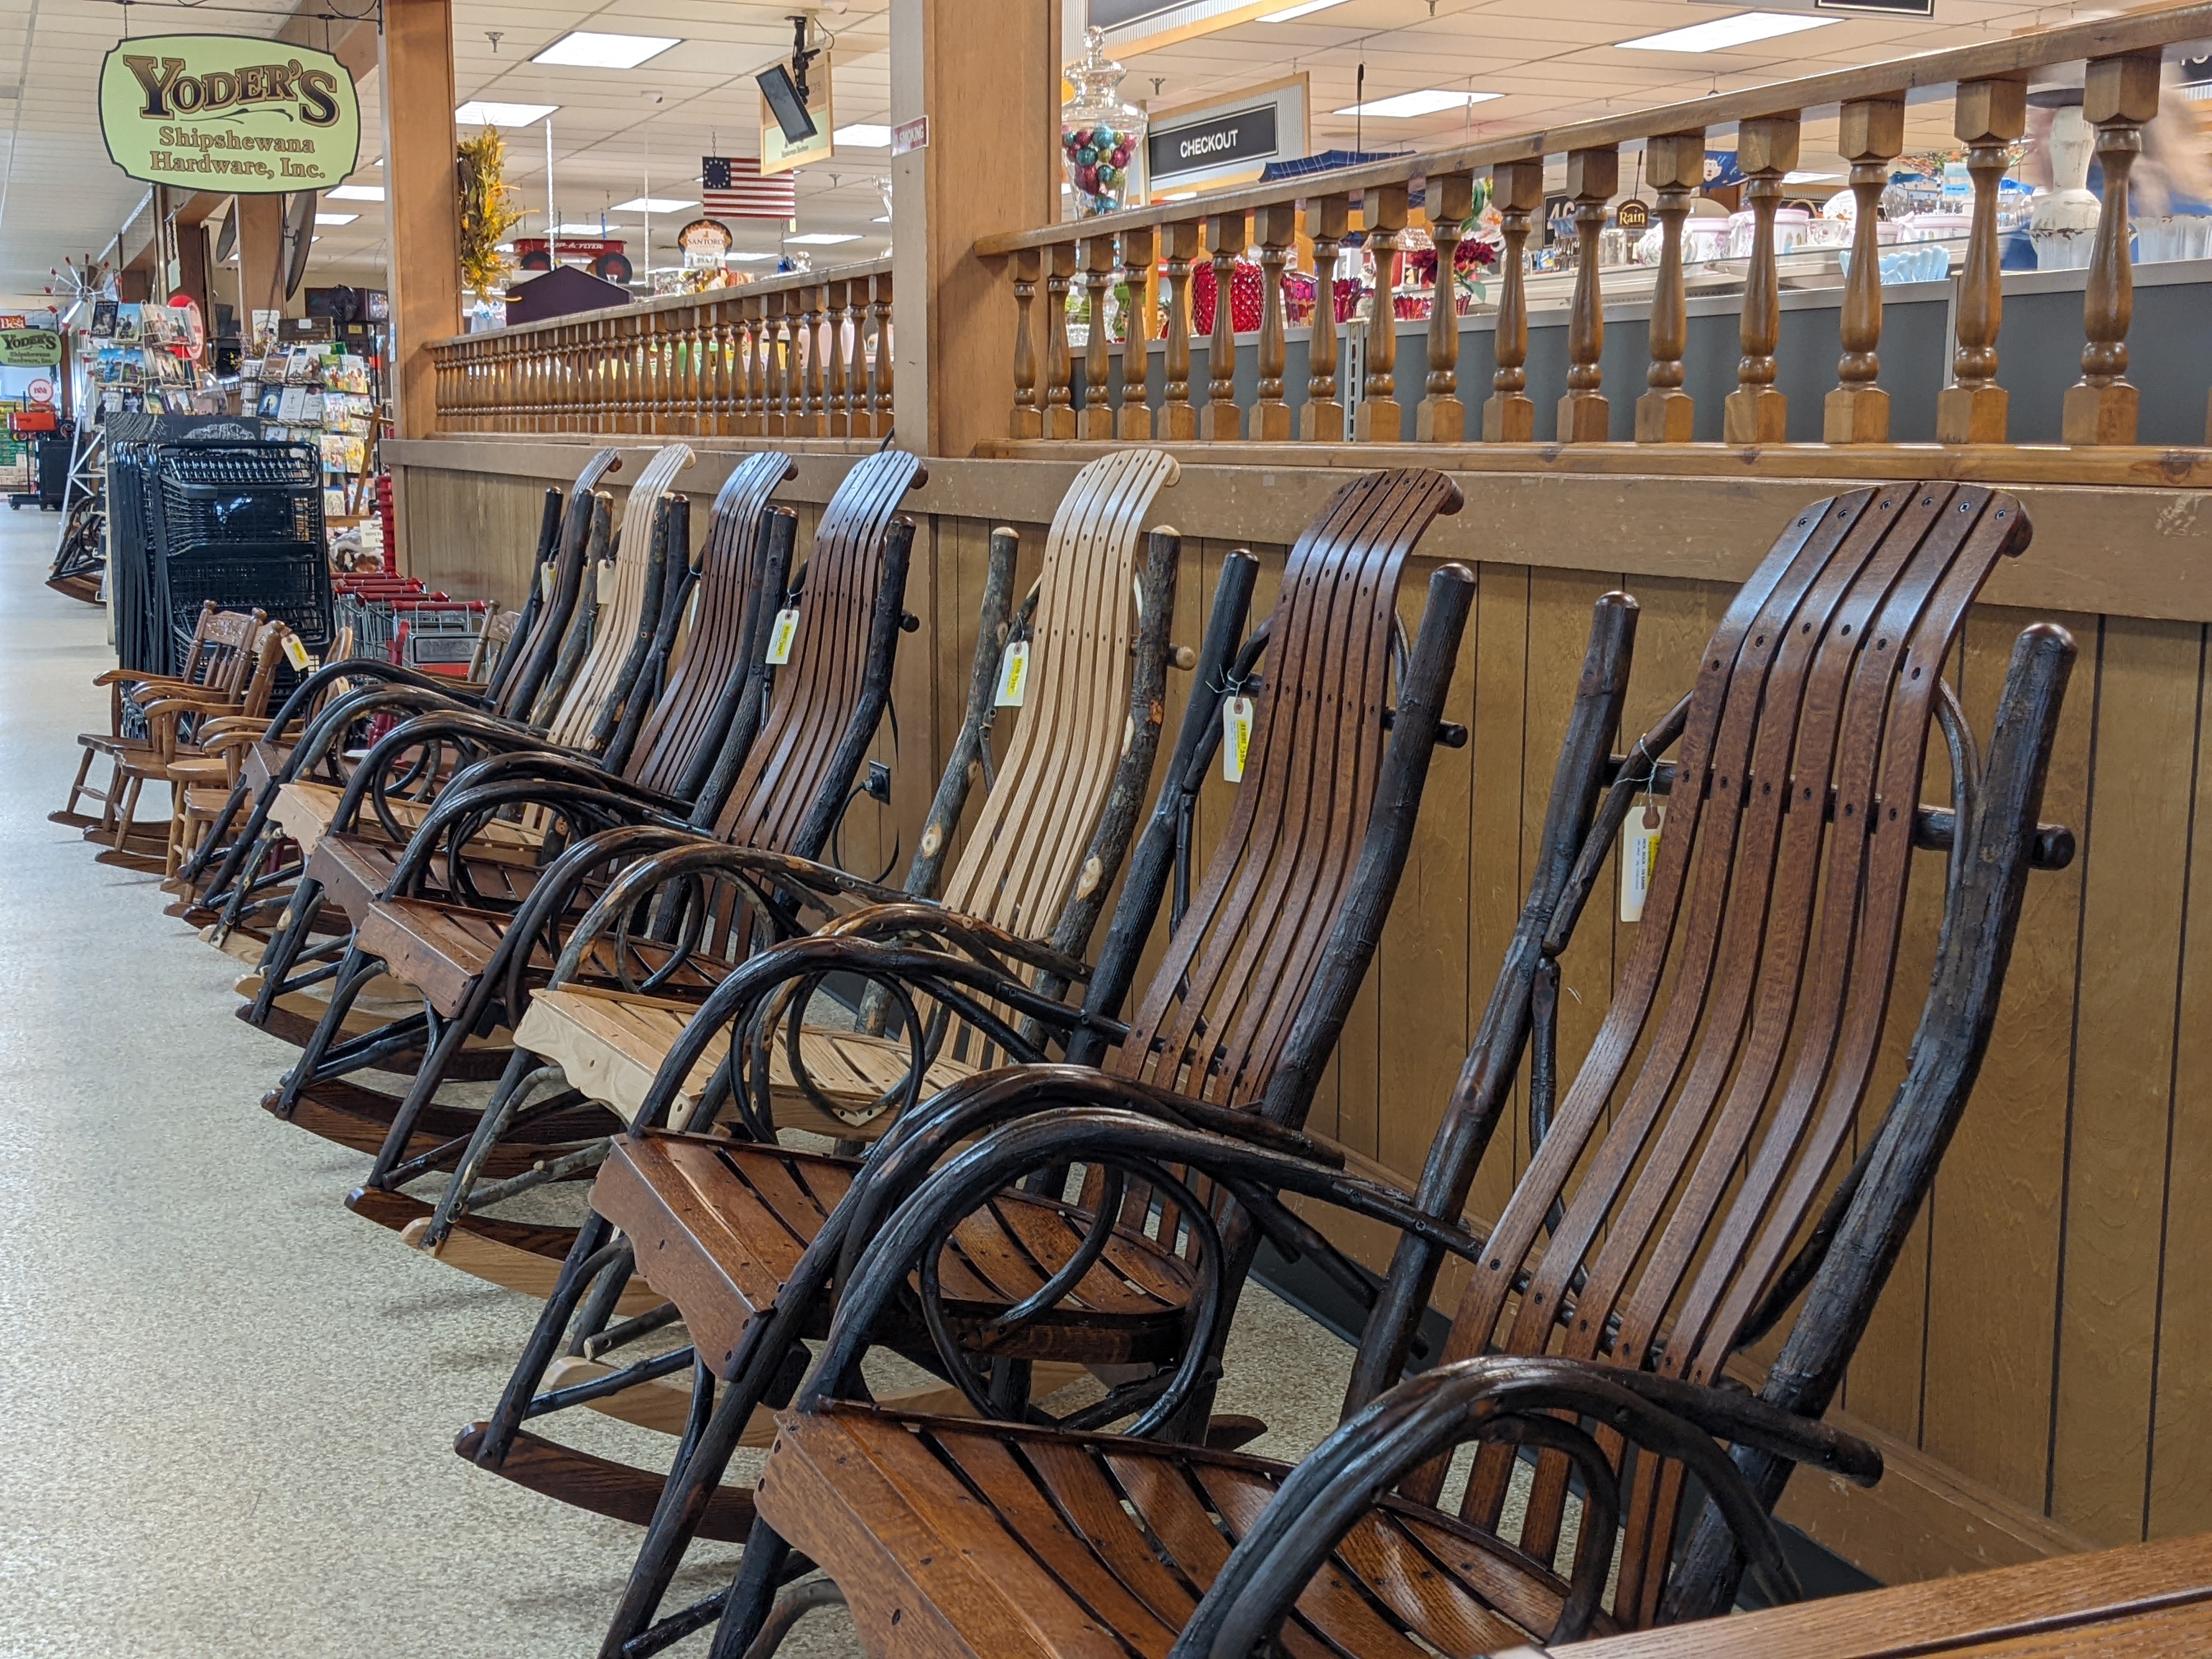 rocking chairs at yoders hardware